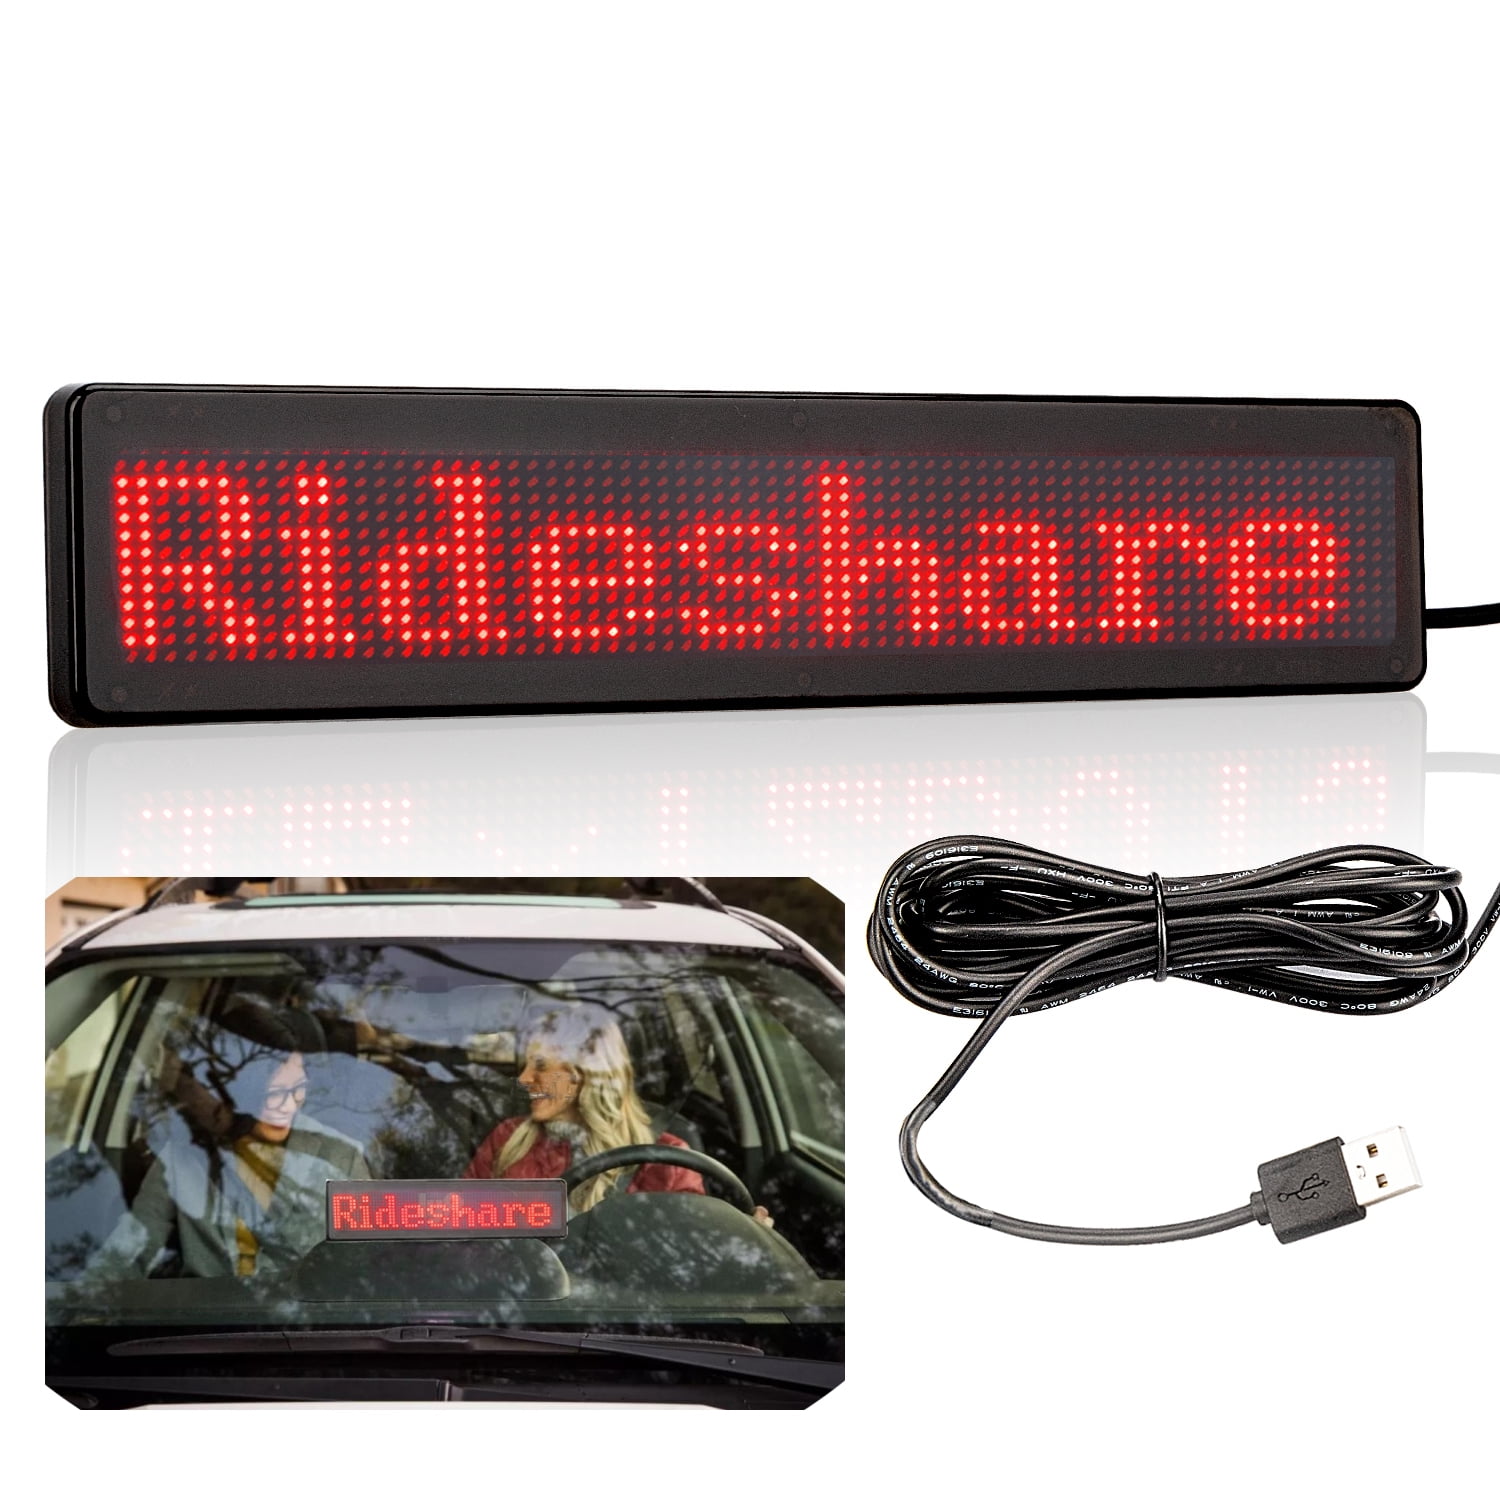 This LED Perfect For Delivery Car Windows - Huge Bright LED Signs